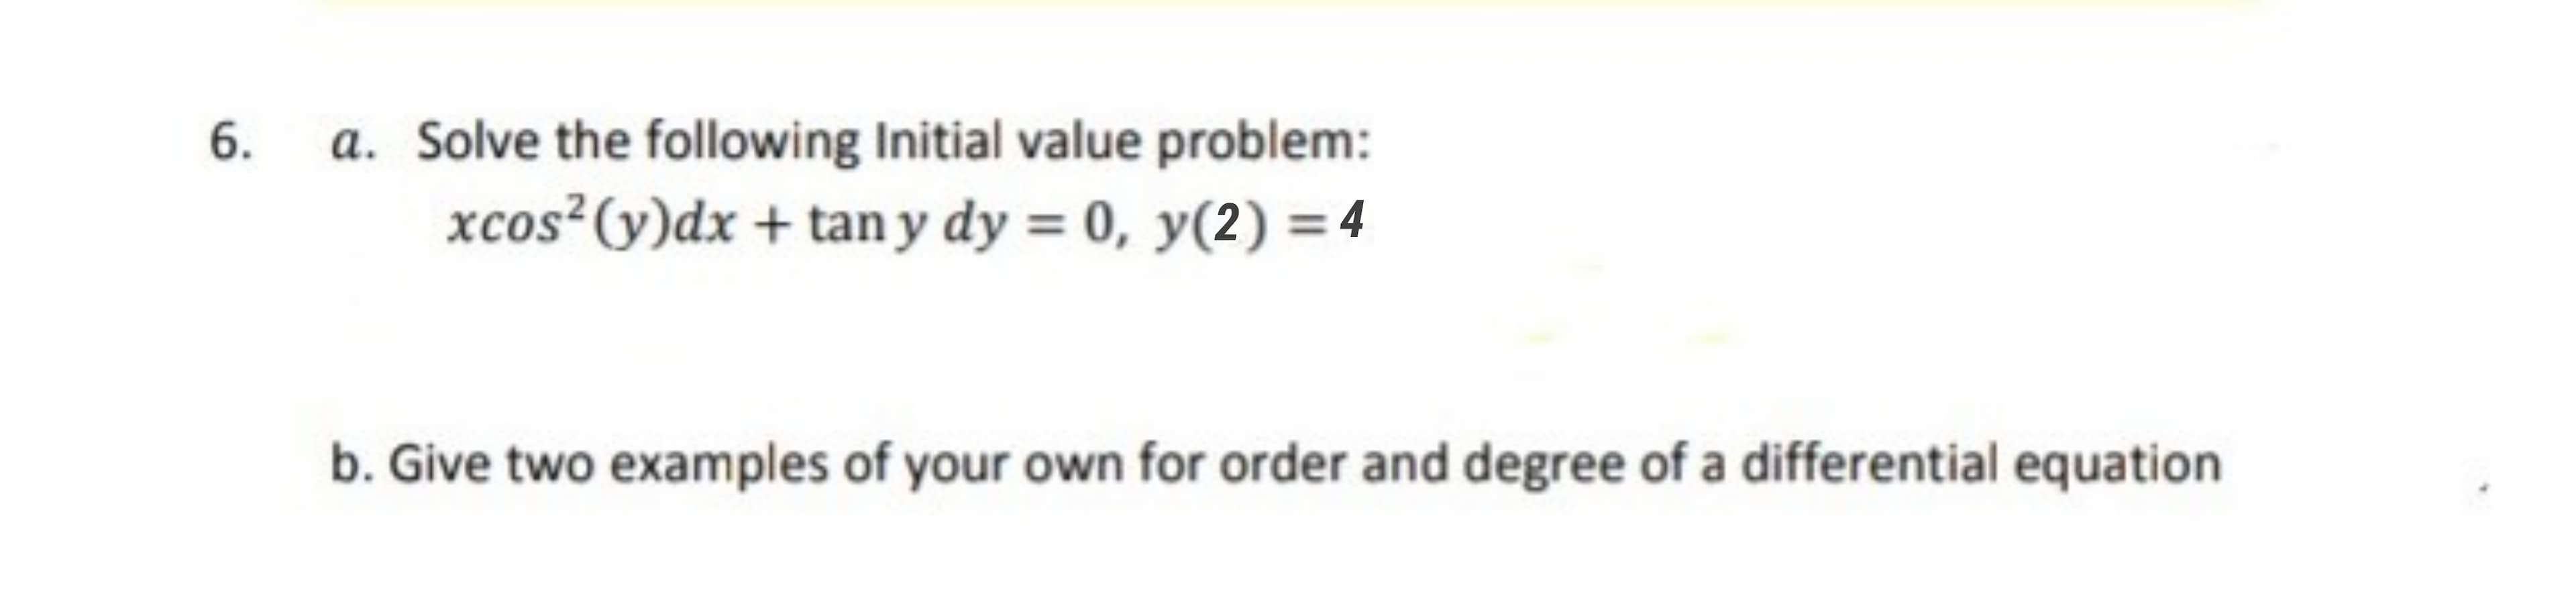 a. Solve the following Initial value problem:
xcos²(y)dx + tan y dy = 0, y(2) = 4
b. Give two examples of your own for order and degree of a differential equation
